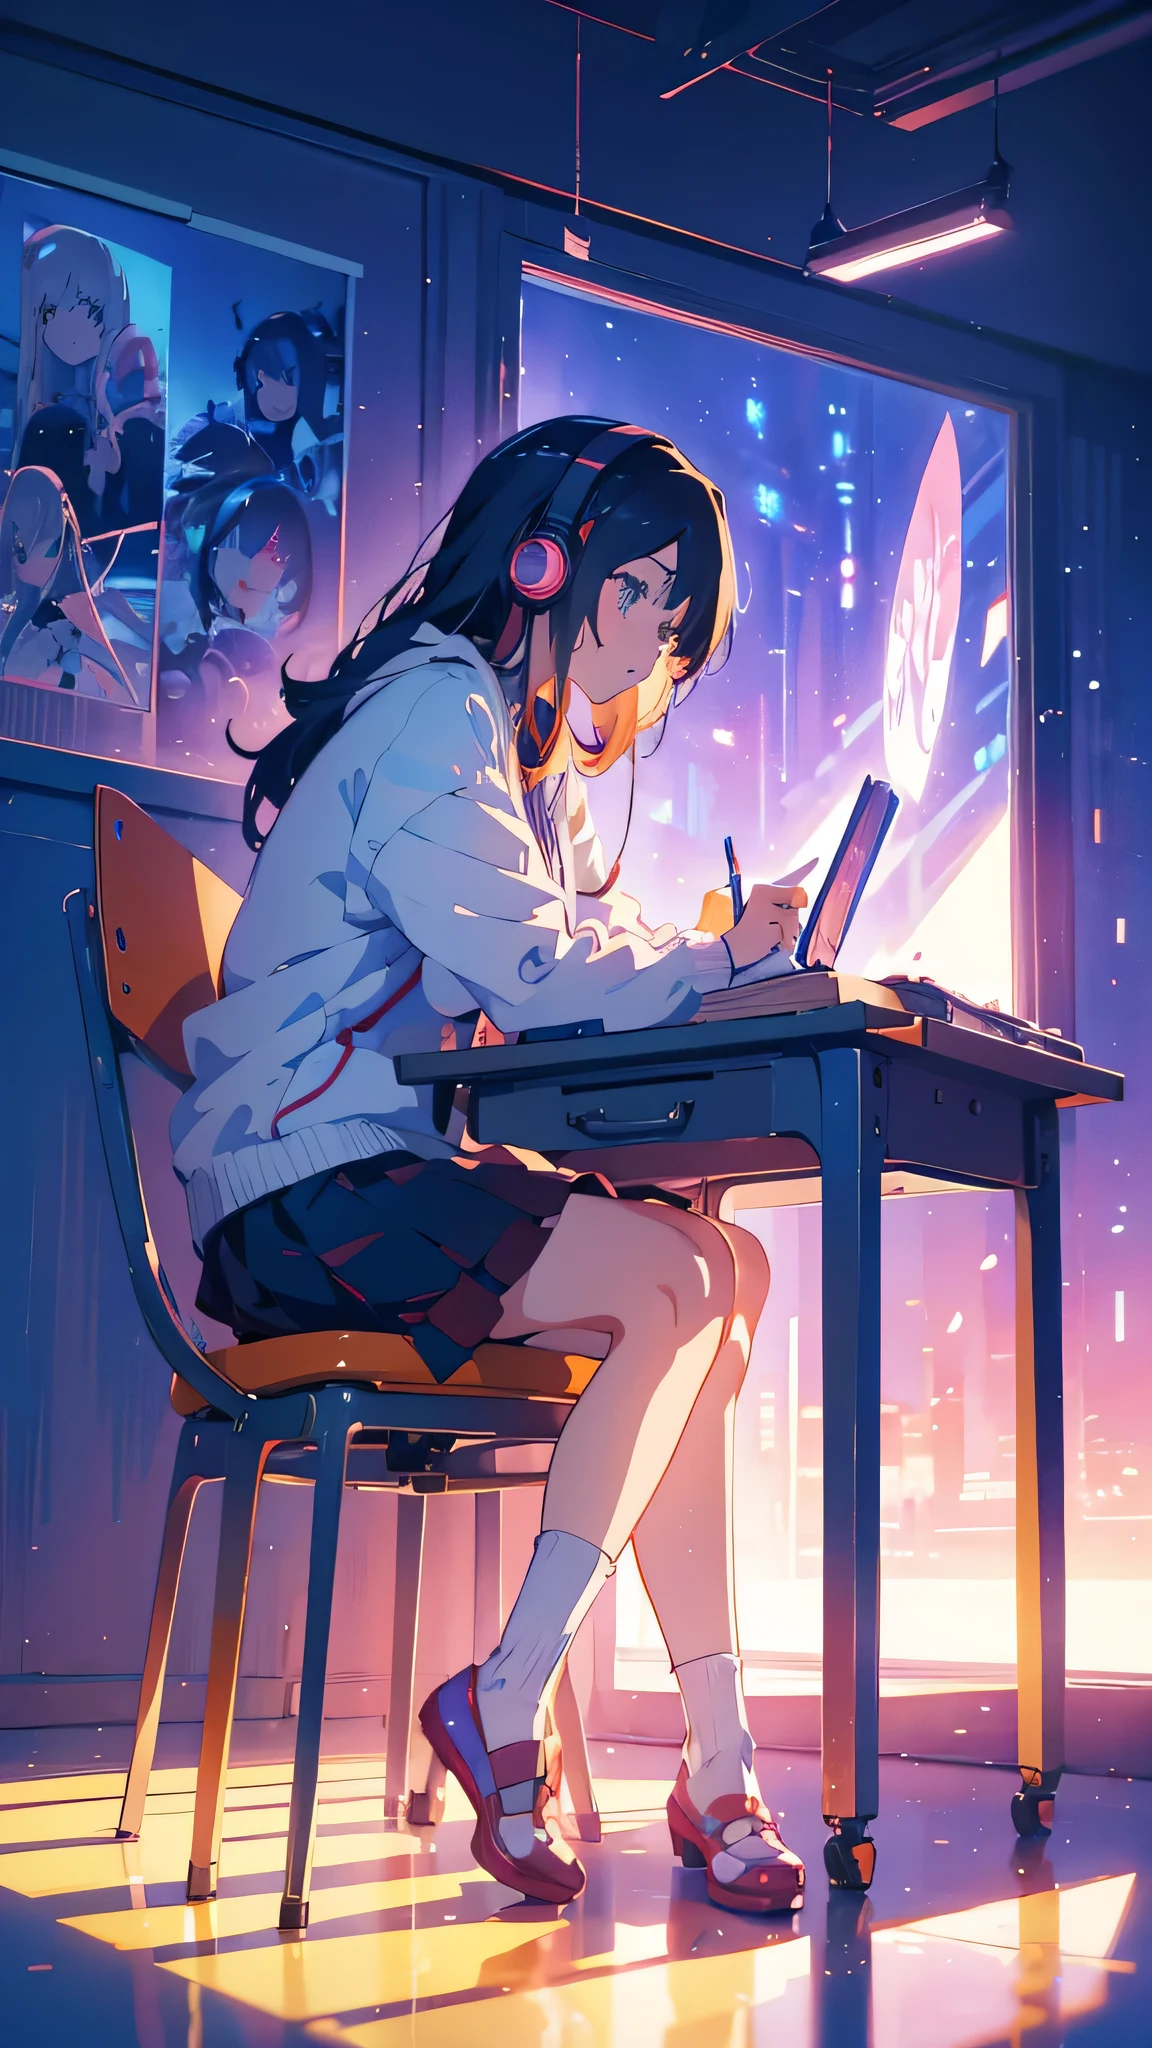 Anime girl sitting at a desk with headphones on and writing, Anime Style 4 k, Digital anime illustration, Digital anime art, Anime Style. 8k, Anime Moe Art Style, anime art wallpaper 4k, anime art wallpaper 4k, Anime Style illustration, Smooth anime CG art, detailed Digital anime art, Anime Art Wallpapers 8K, Realistic Anime 3D Style